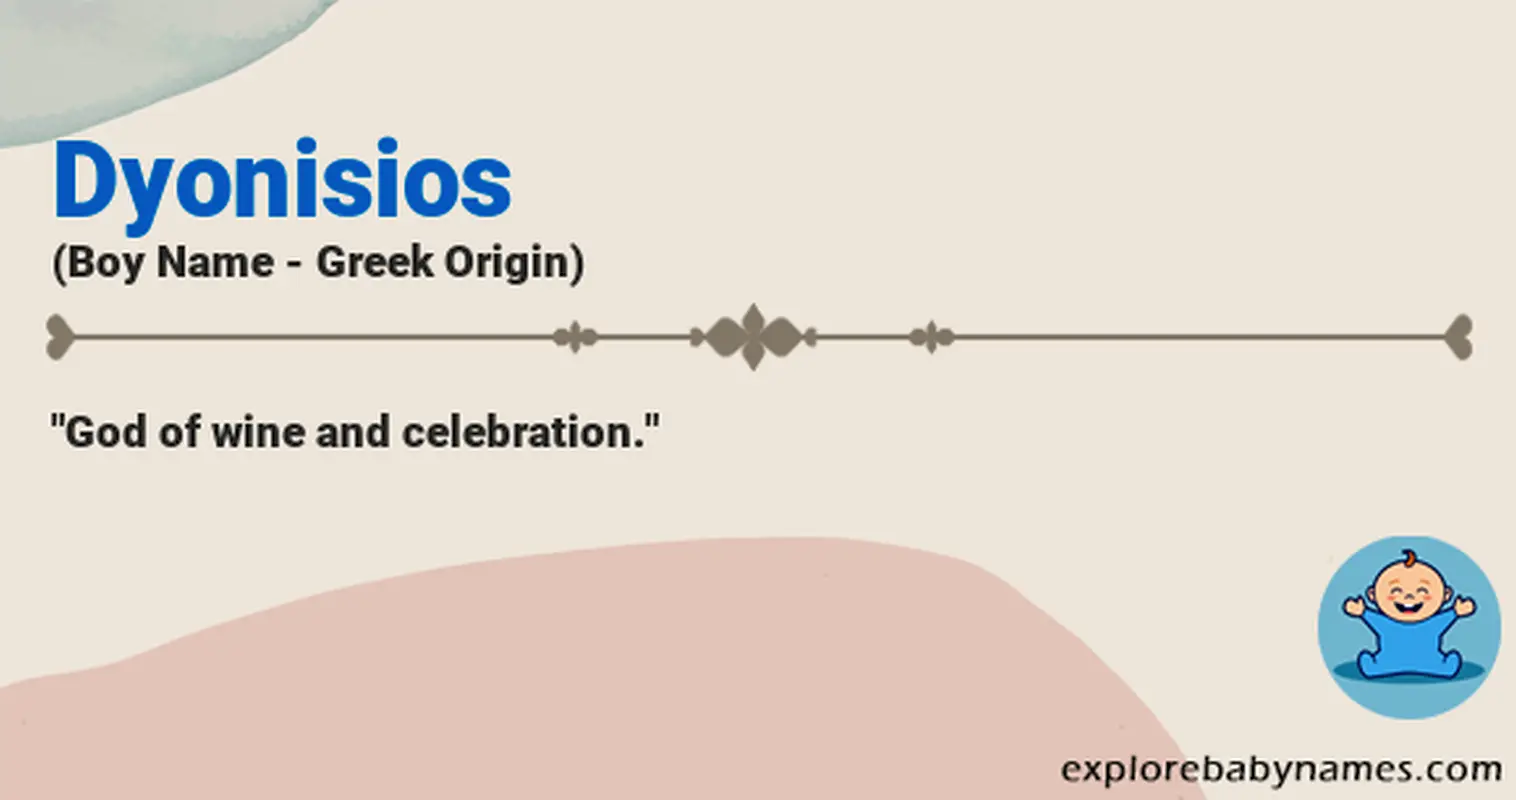 Meaning of Dyonisios